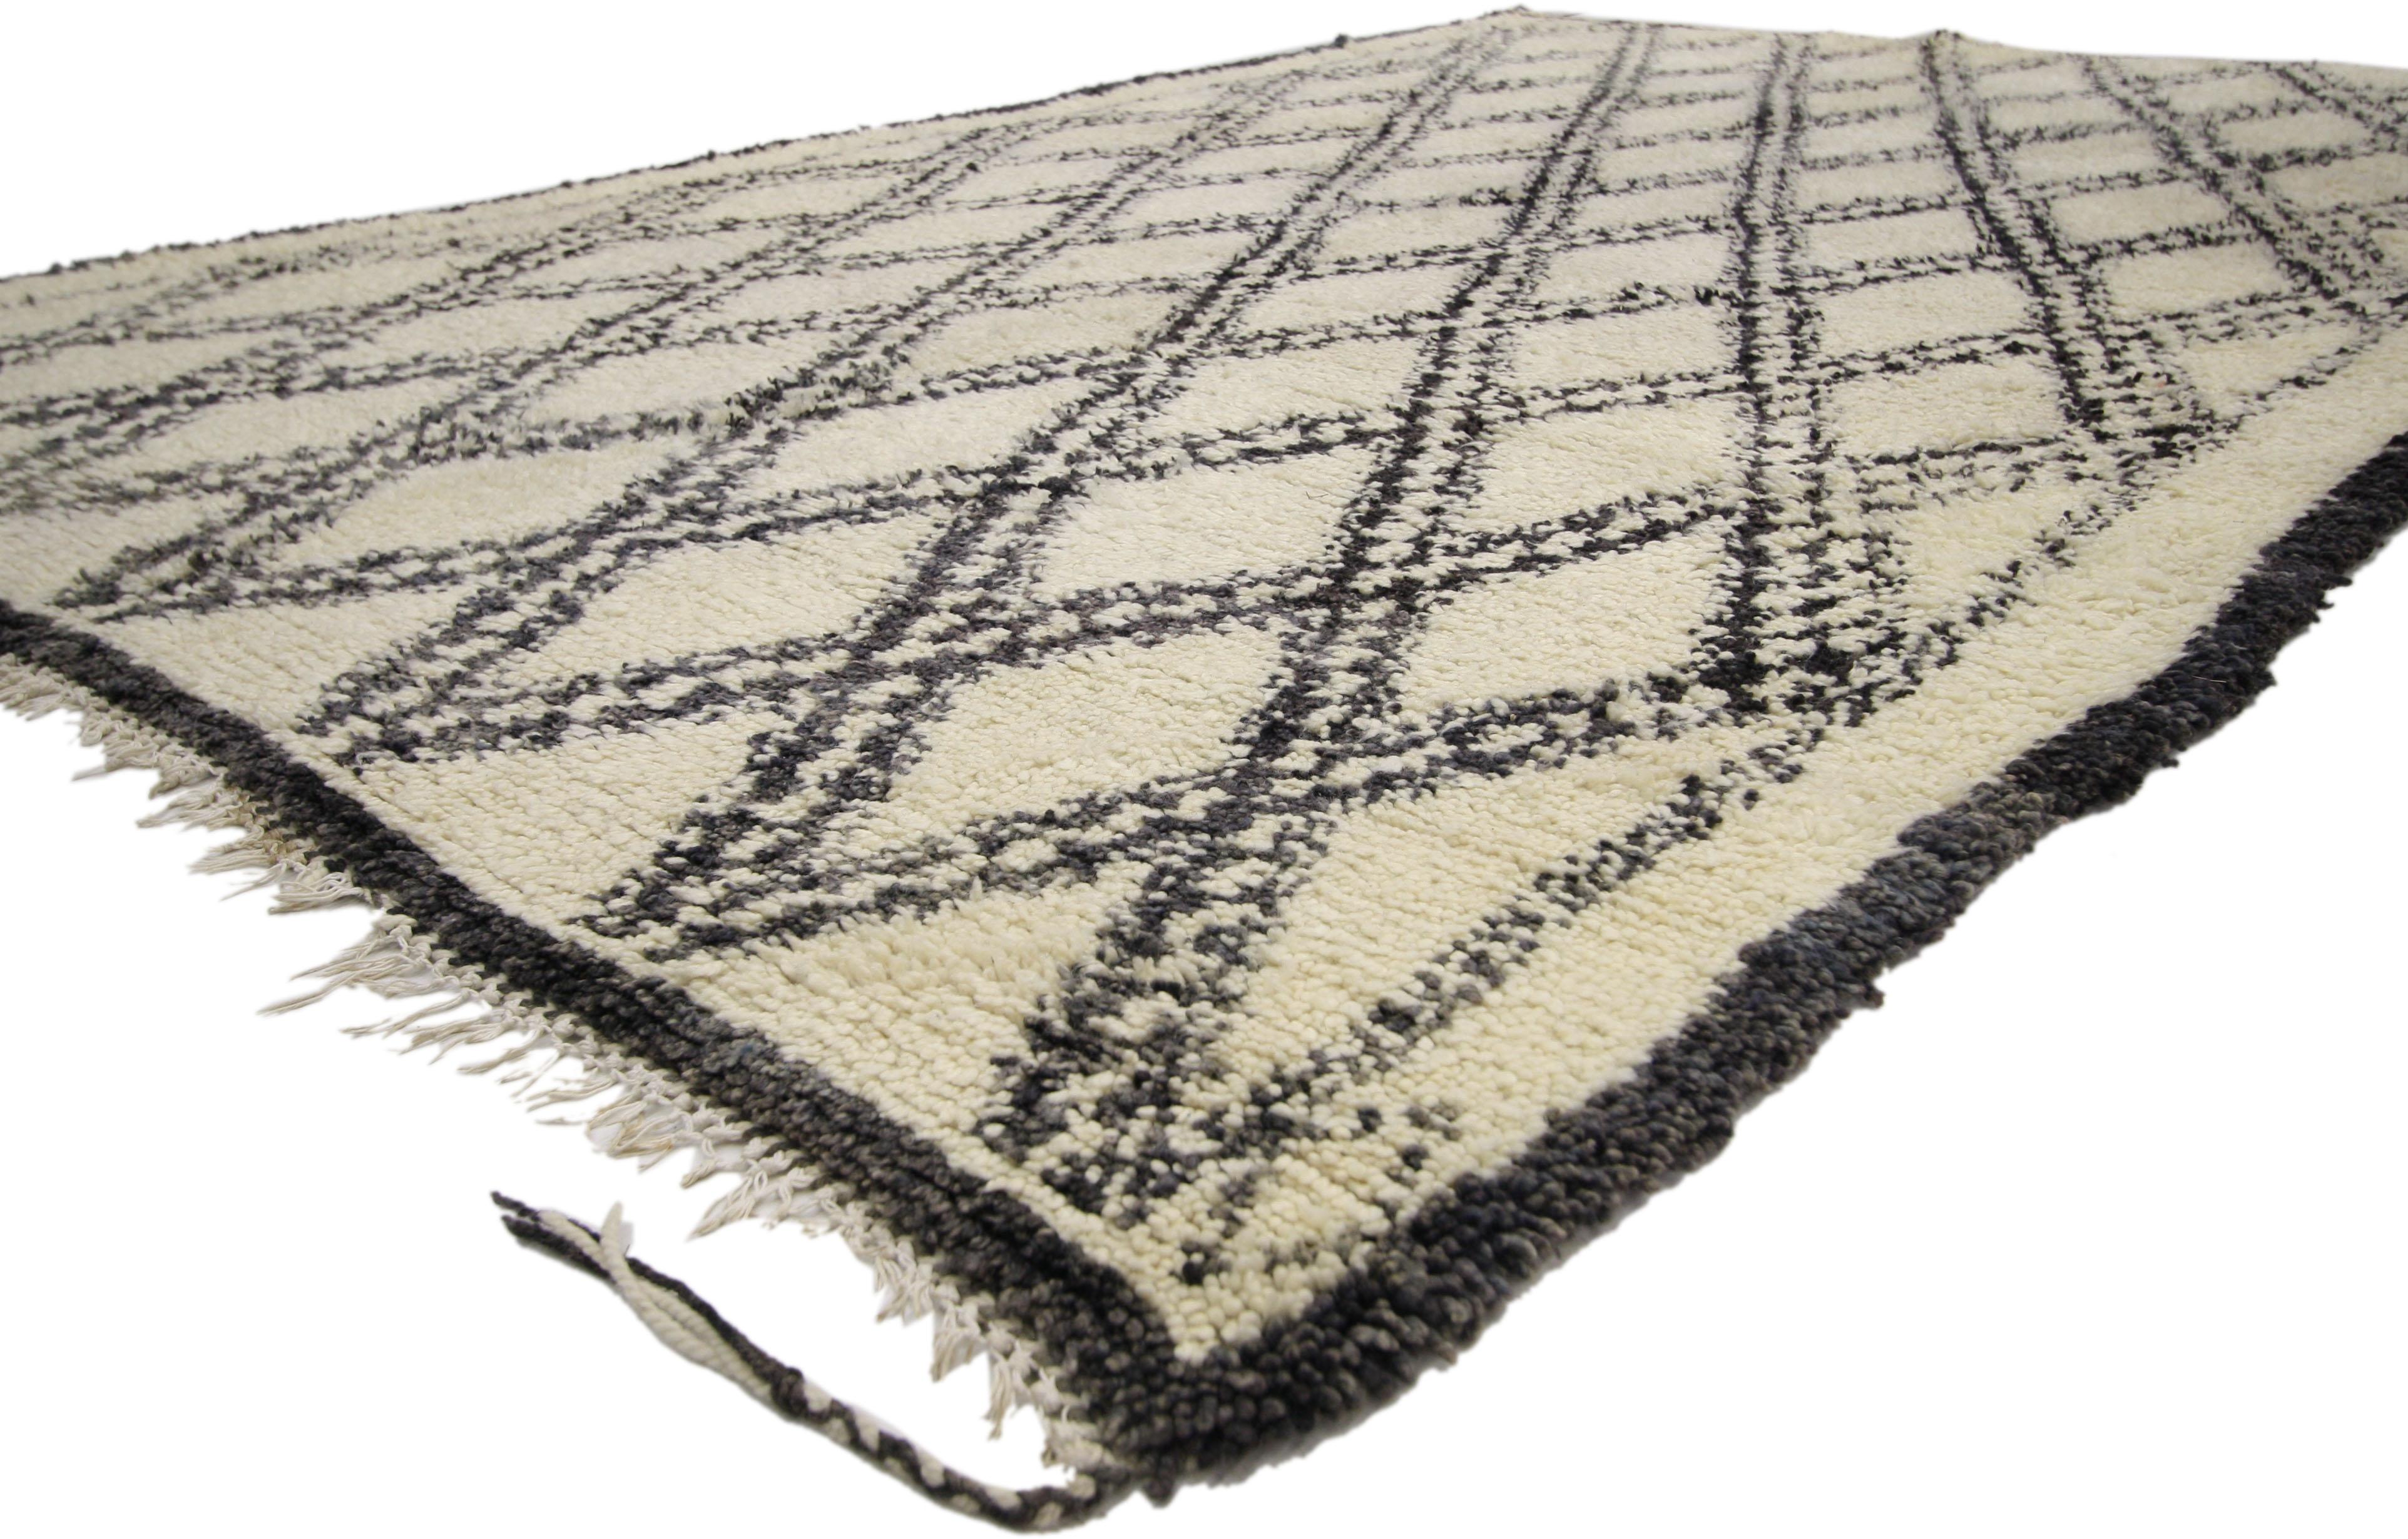 20664 Vintage Moroccan Beni Ourain Rug, 06'05 x 09'03.
This hand-knotted wool vintage Beni Ourain Moroccan rug features a lozenge trellis pattern on a neutral background. Bold, thick lines composed of squares form a diamond lattice on a field of